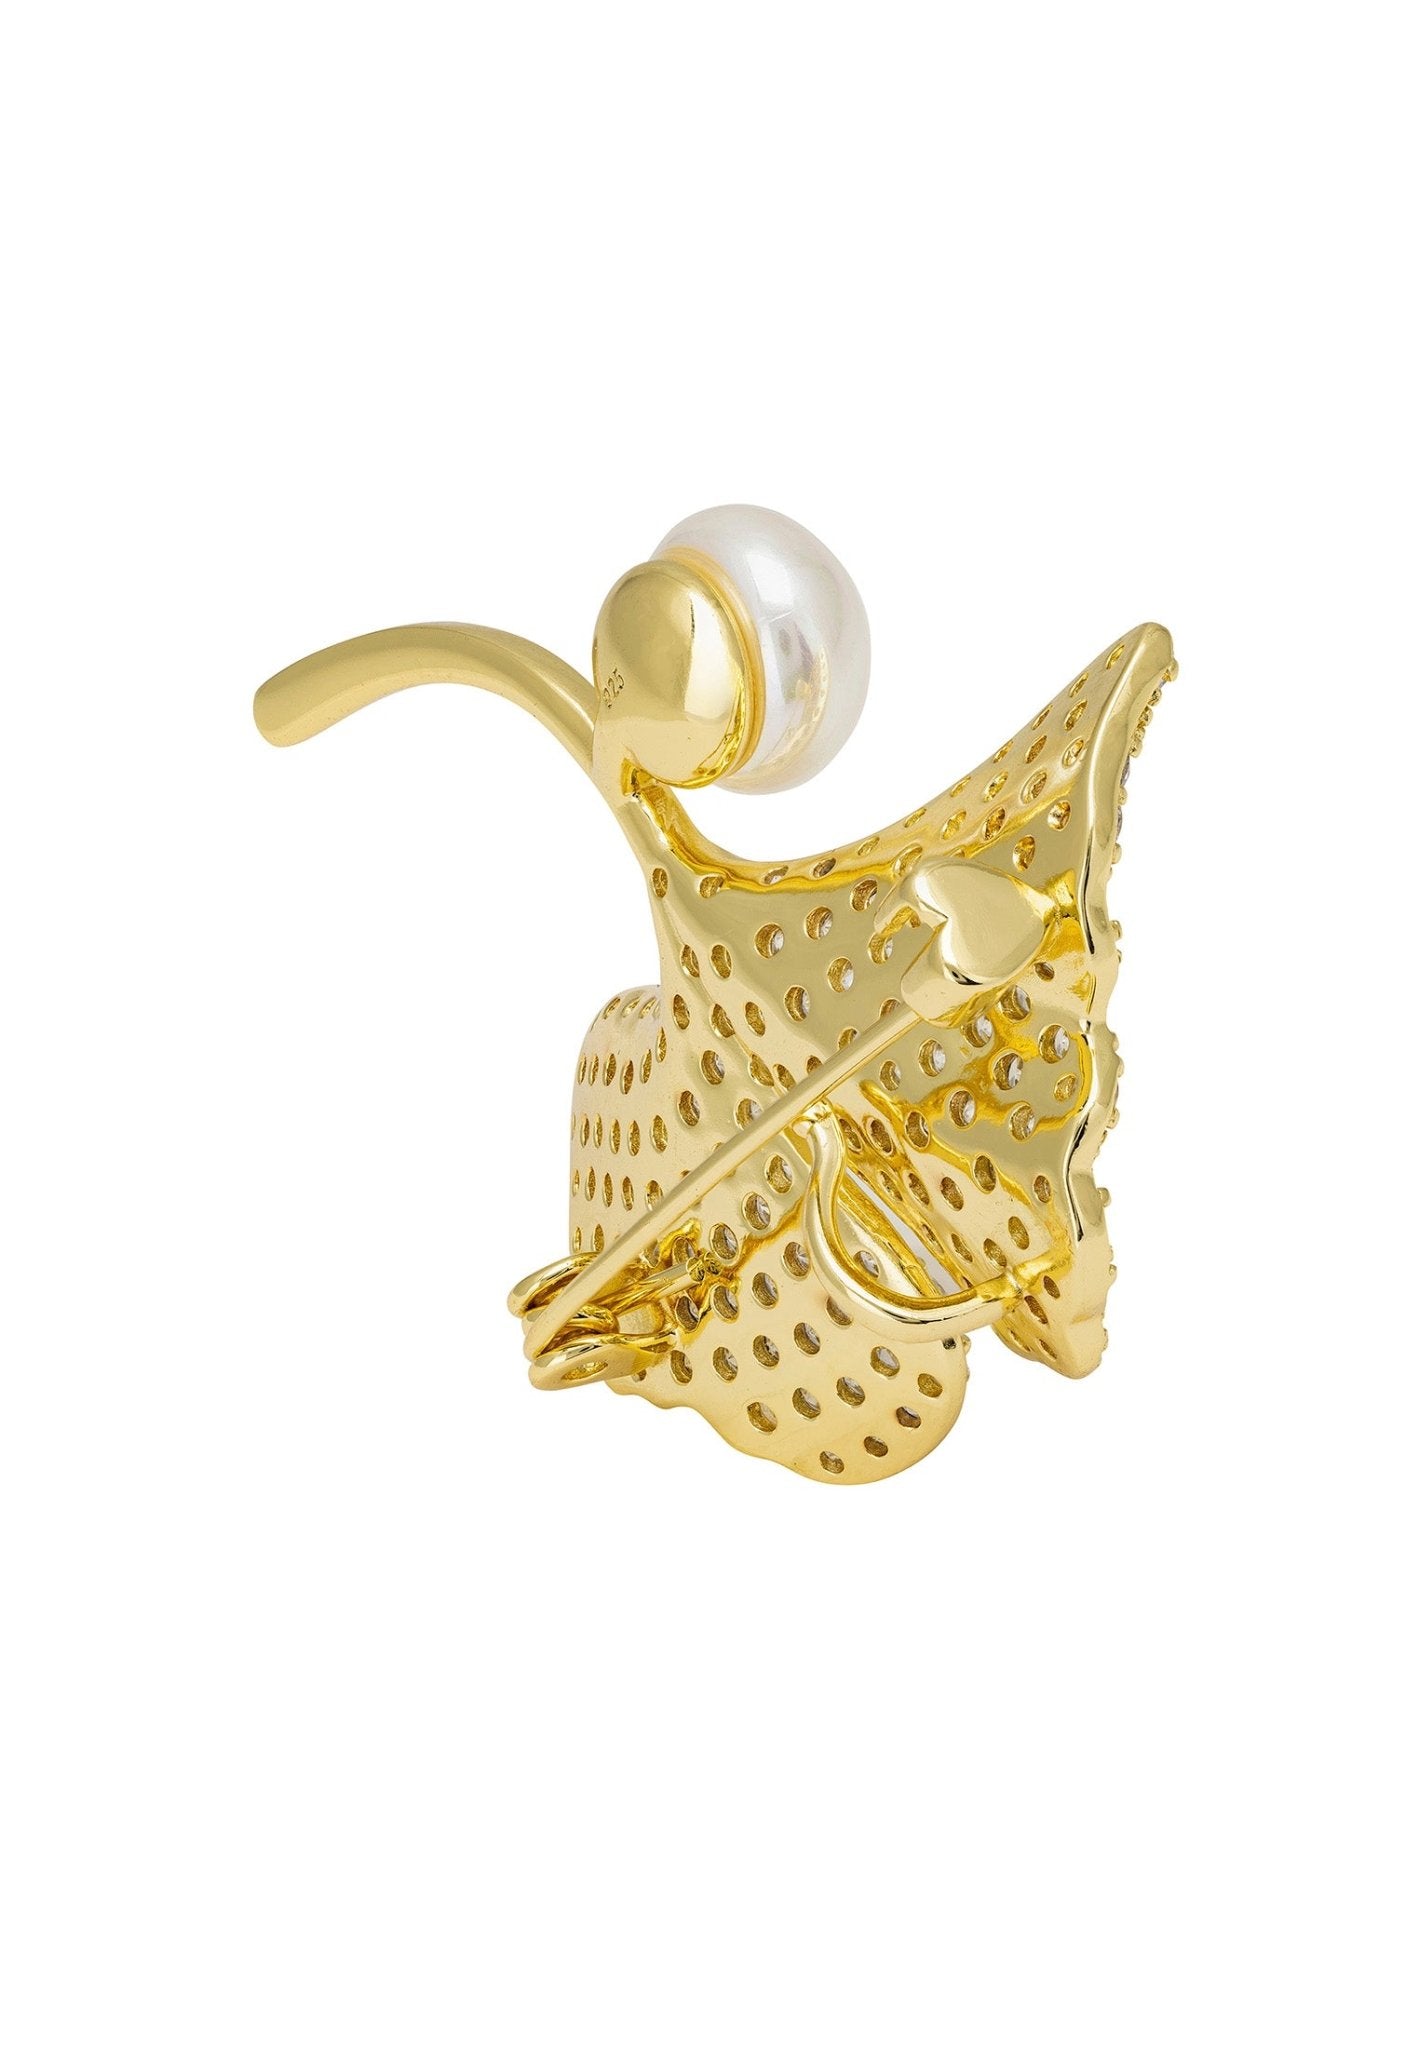 Ginkgo Leaf And Pearl Brooch Gold - LATELITA Brooches